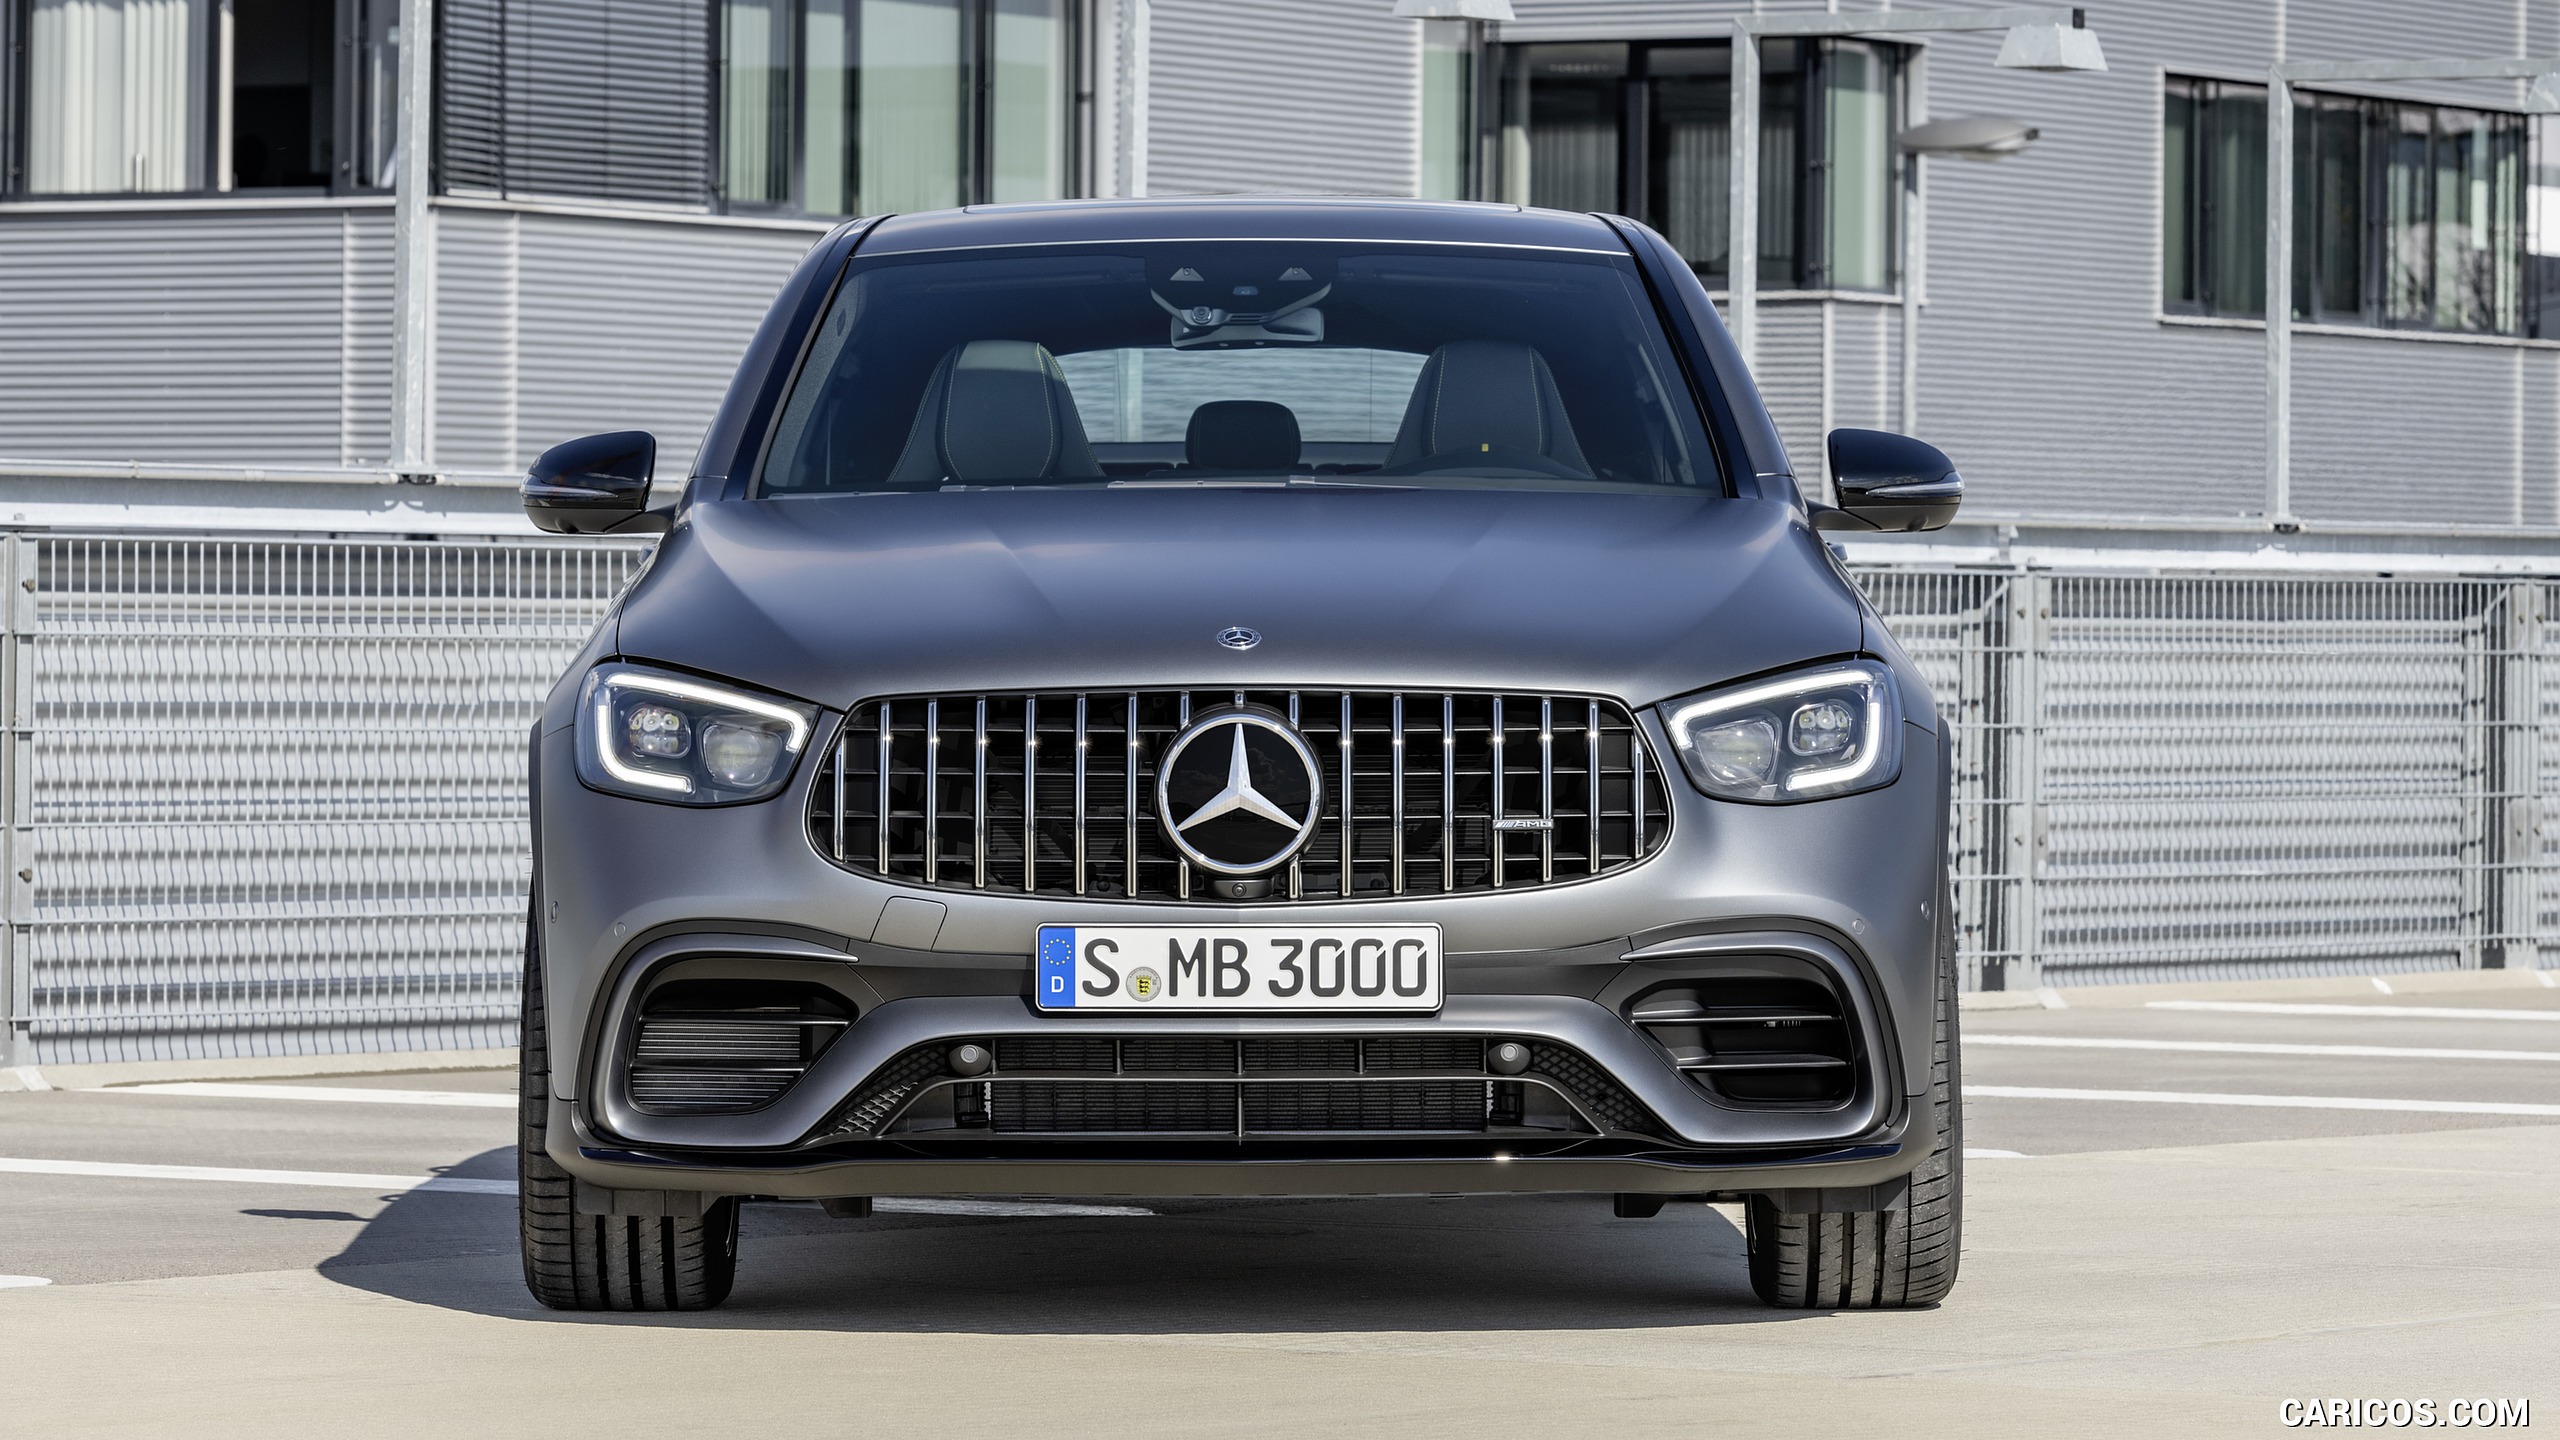 2020 Mercedes-AMG GLC 63 S 4MATIC+ Coupe - Front, #11 of 102